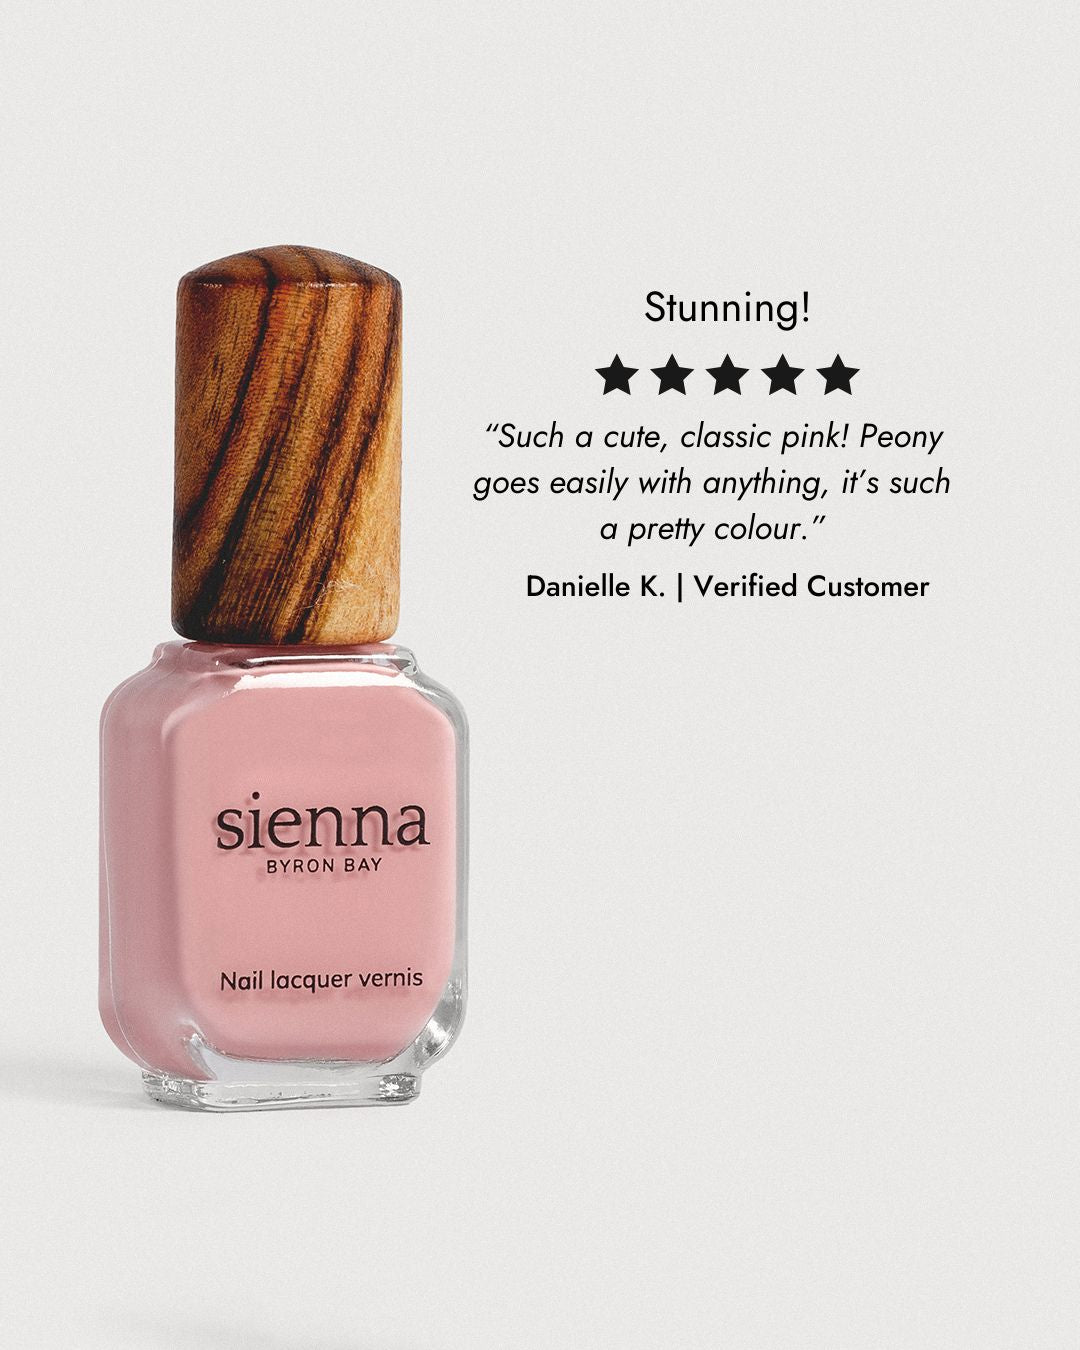 Cherry blossom pink nail polish glass bottle with 5 star review